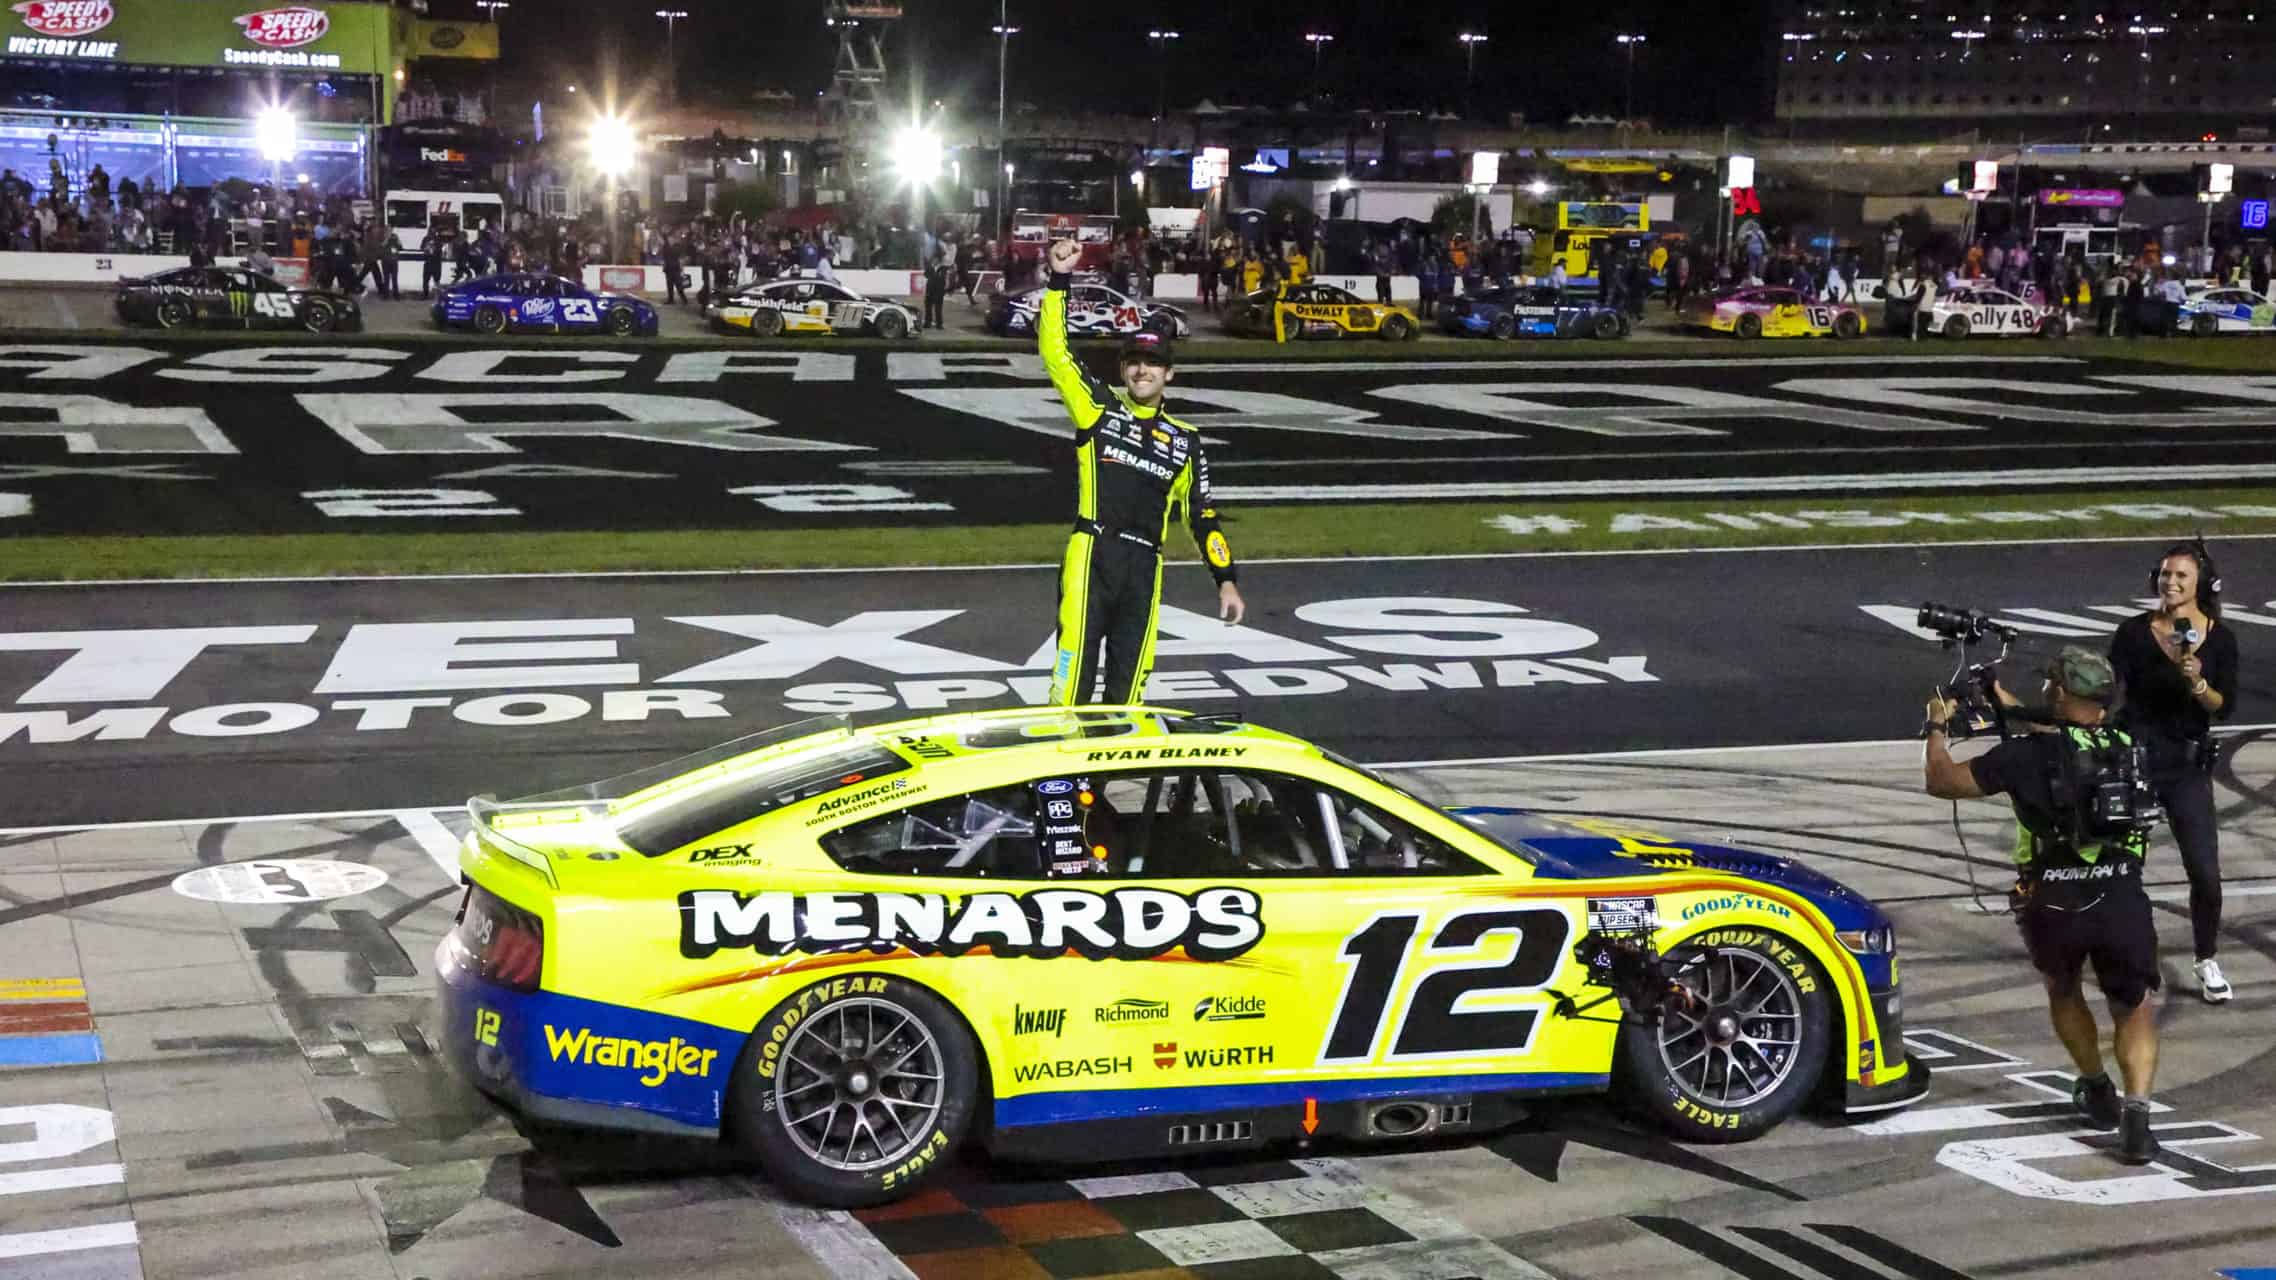 Ryan Blaney wins the 2022 NASCAR All-Star Race at Texas Motor Speedway. Photo by Rachel Schuoler.